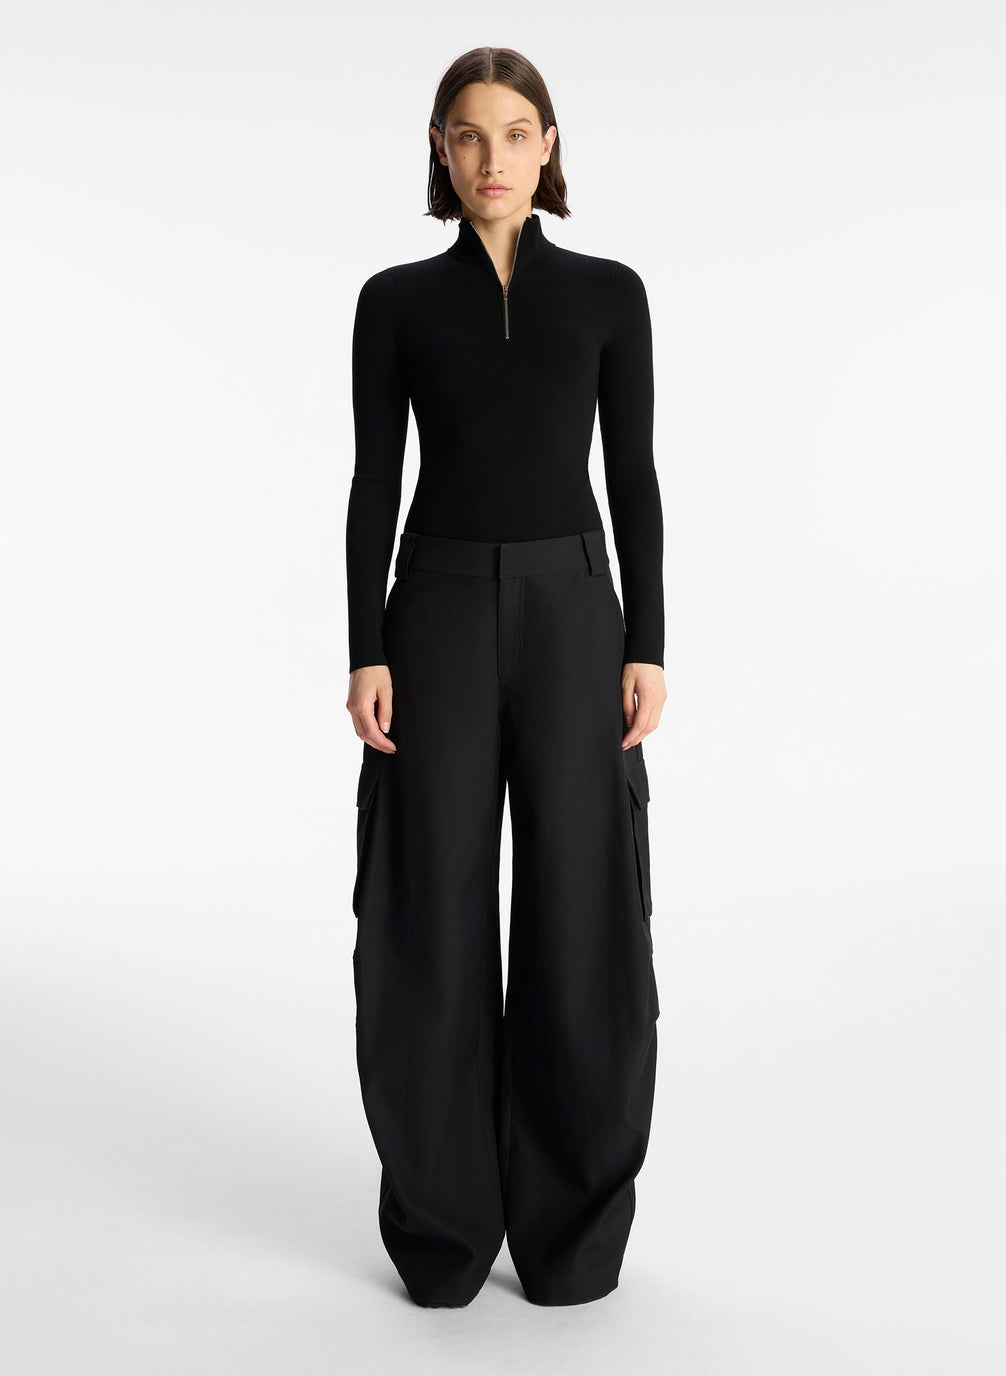 front view of woman wearing black half zip compact knit long sleeve top and black pants